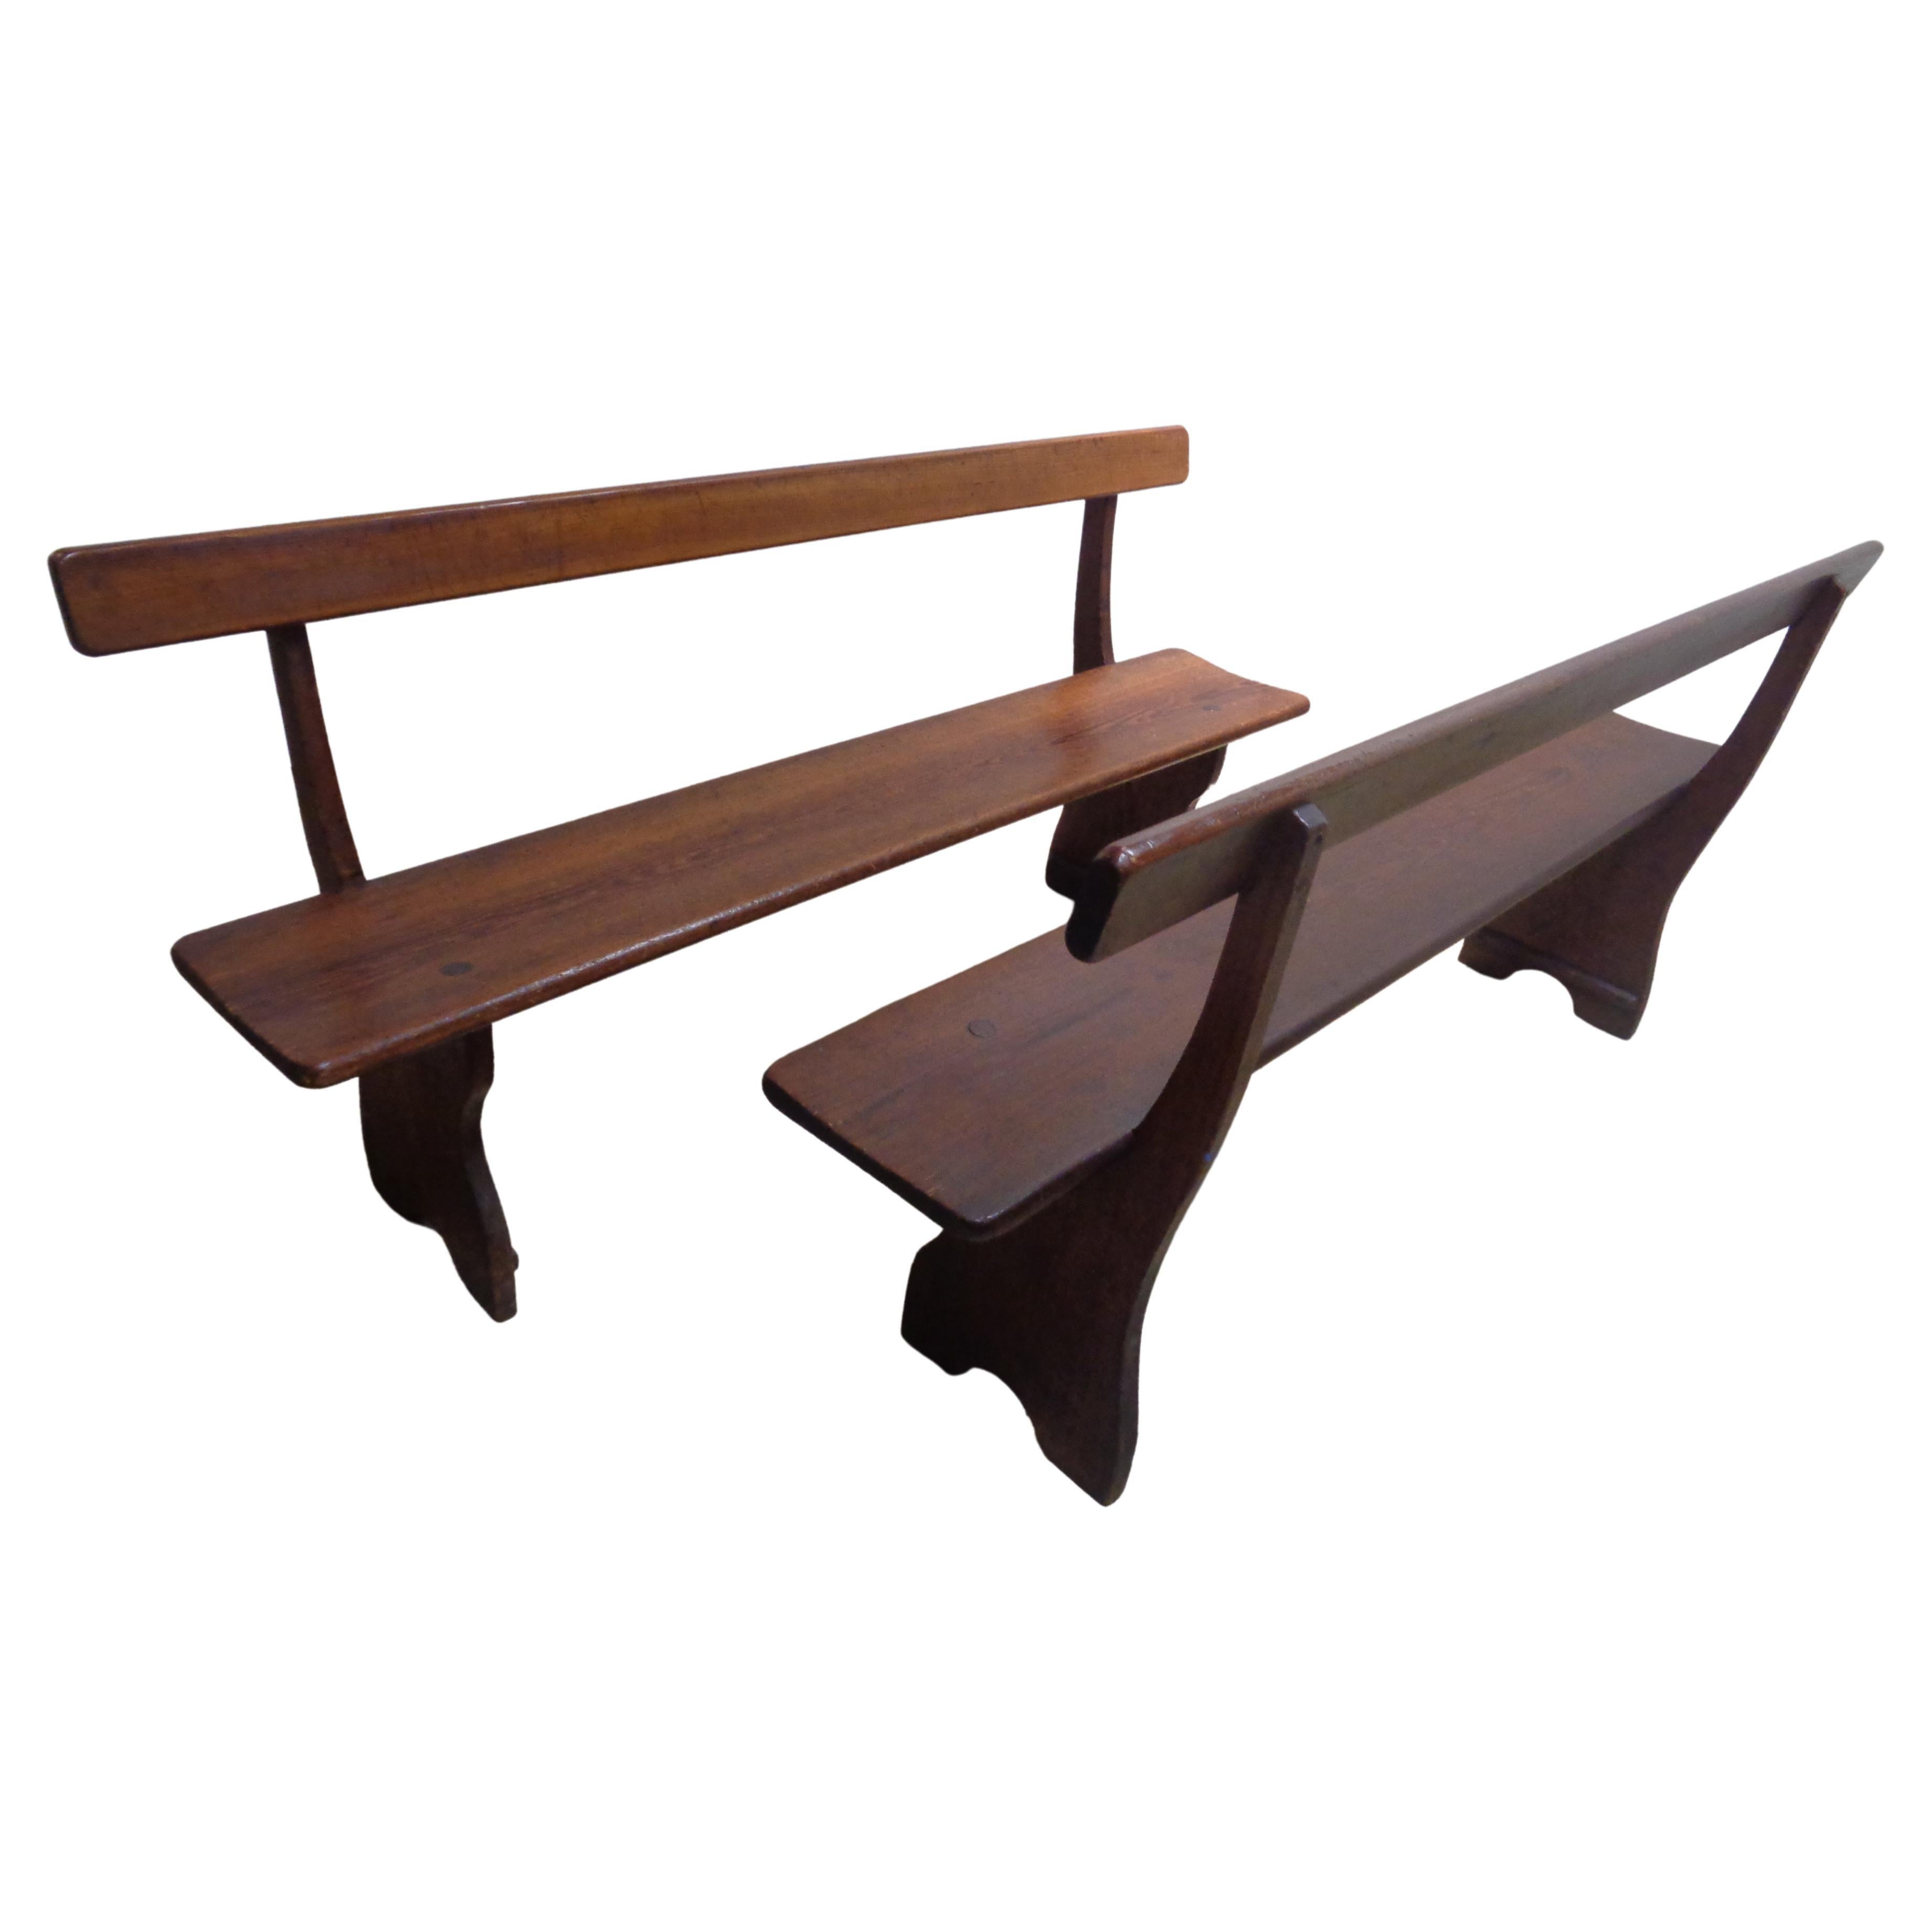  Exceptional Antique American Country Benches For Sale 4